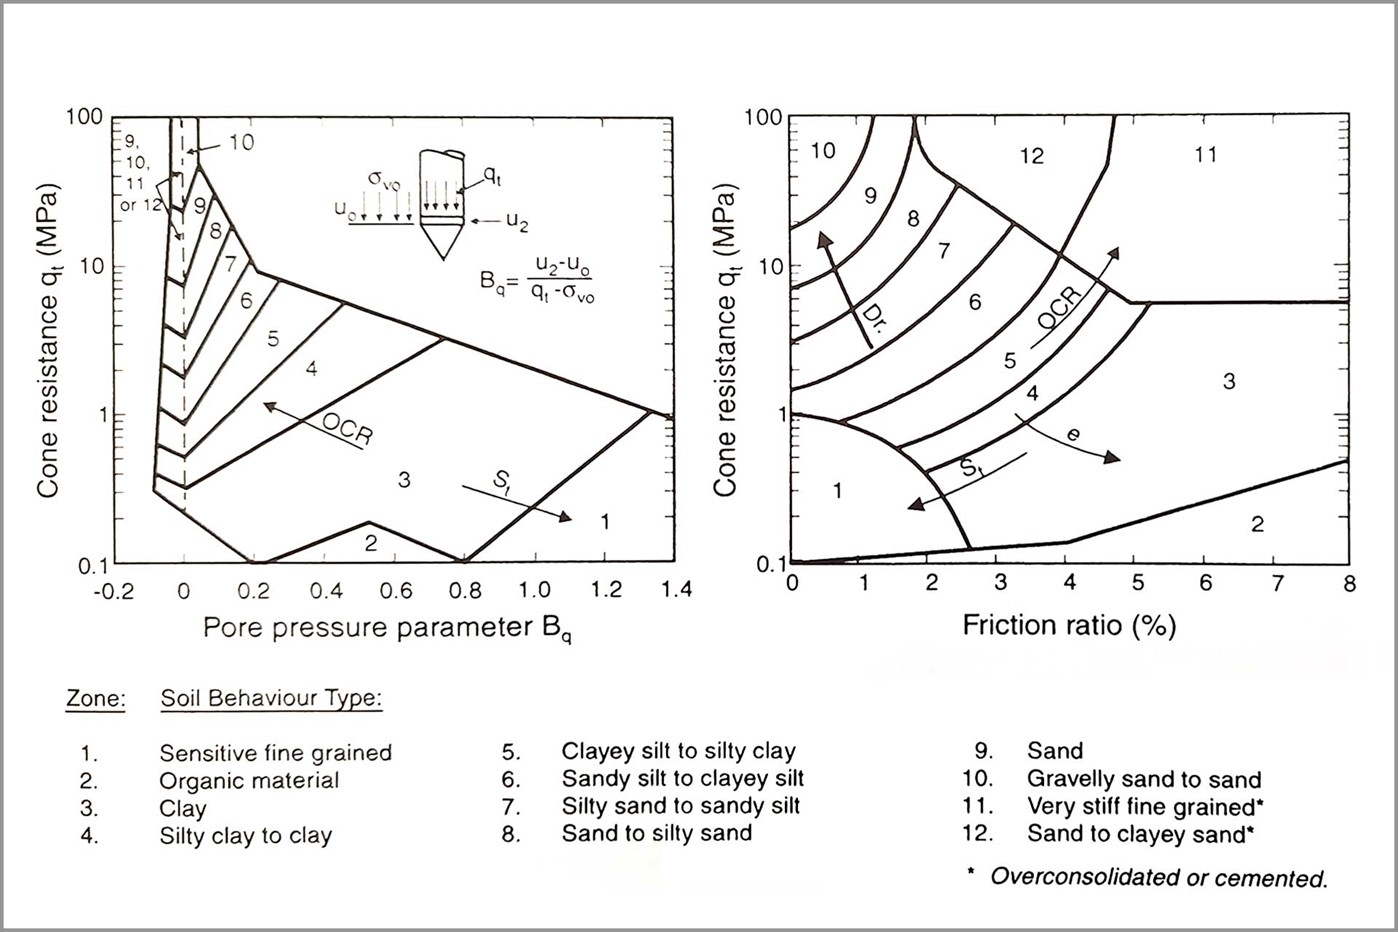 Figure 2: The soil classification proposed by Robertson and Campanella | Image source: Lunne, T., Robertson, P.K. and Powell, J.J.M. (1997) Cone Penetration Testing in Geotechnical Practice